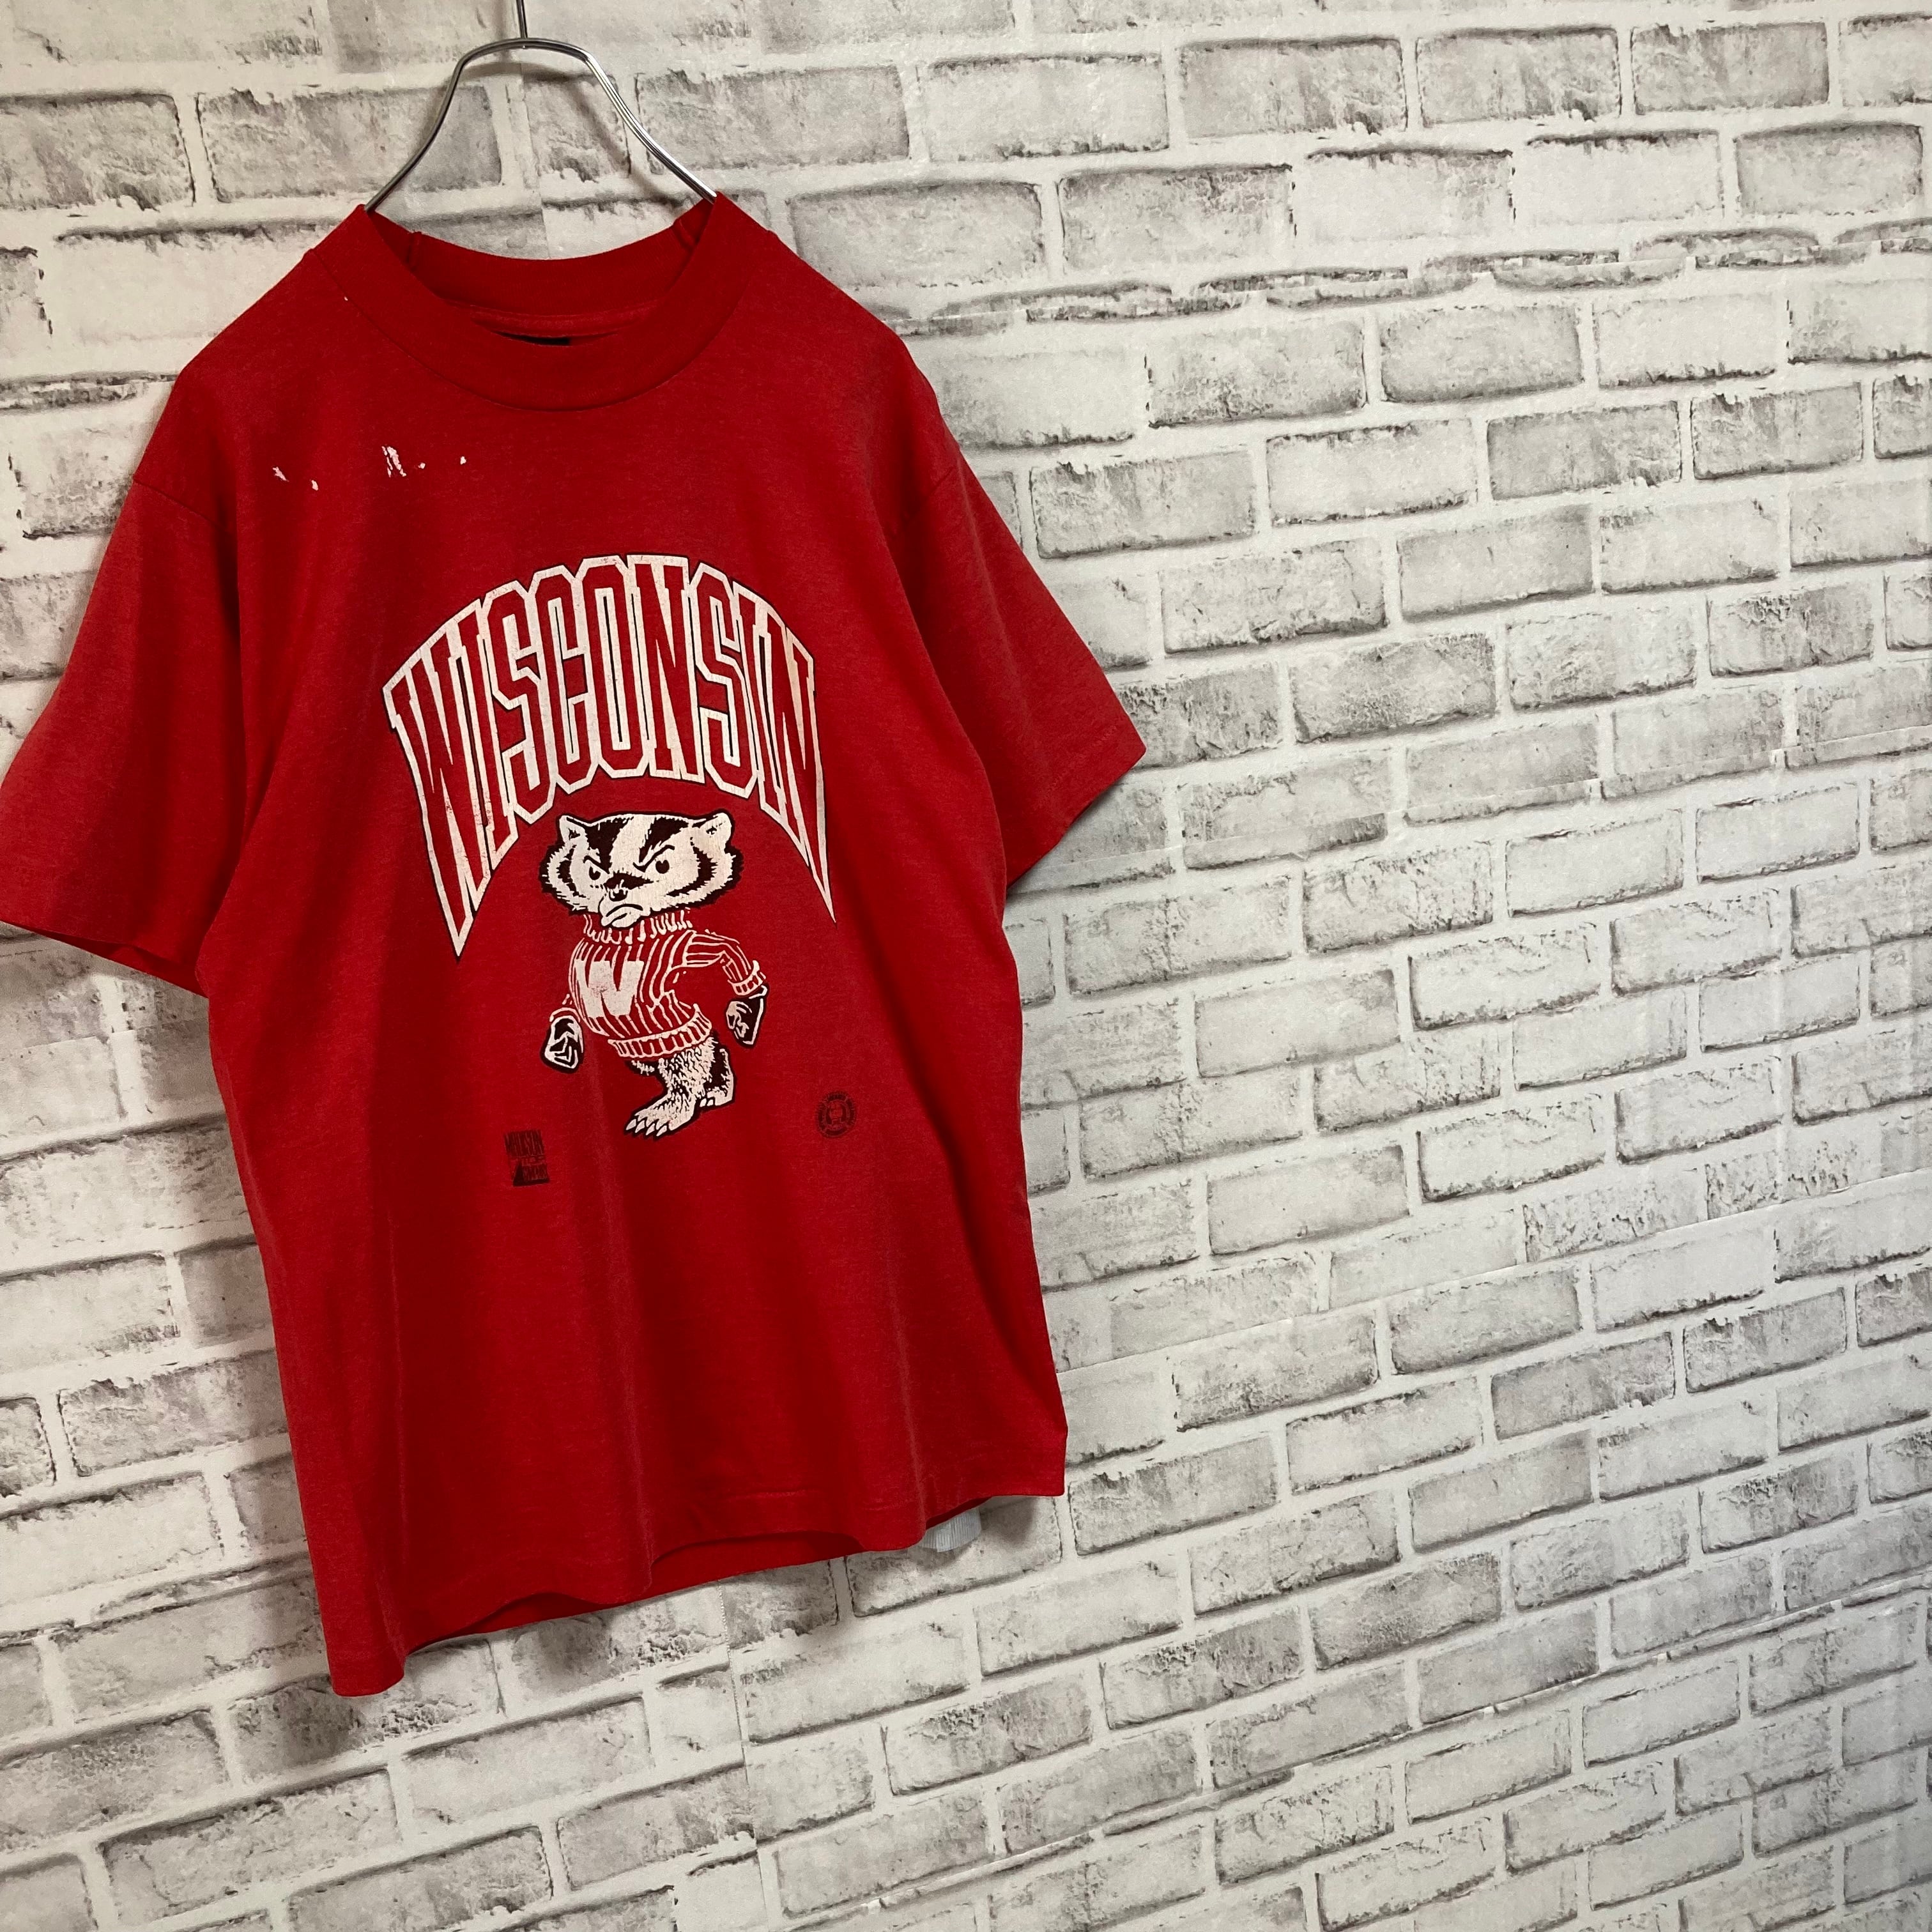 【FRUIT OF THE LOOM】S/S Tee L相当 “WISCONSIN” Made in ...